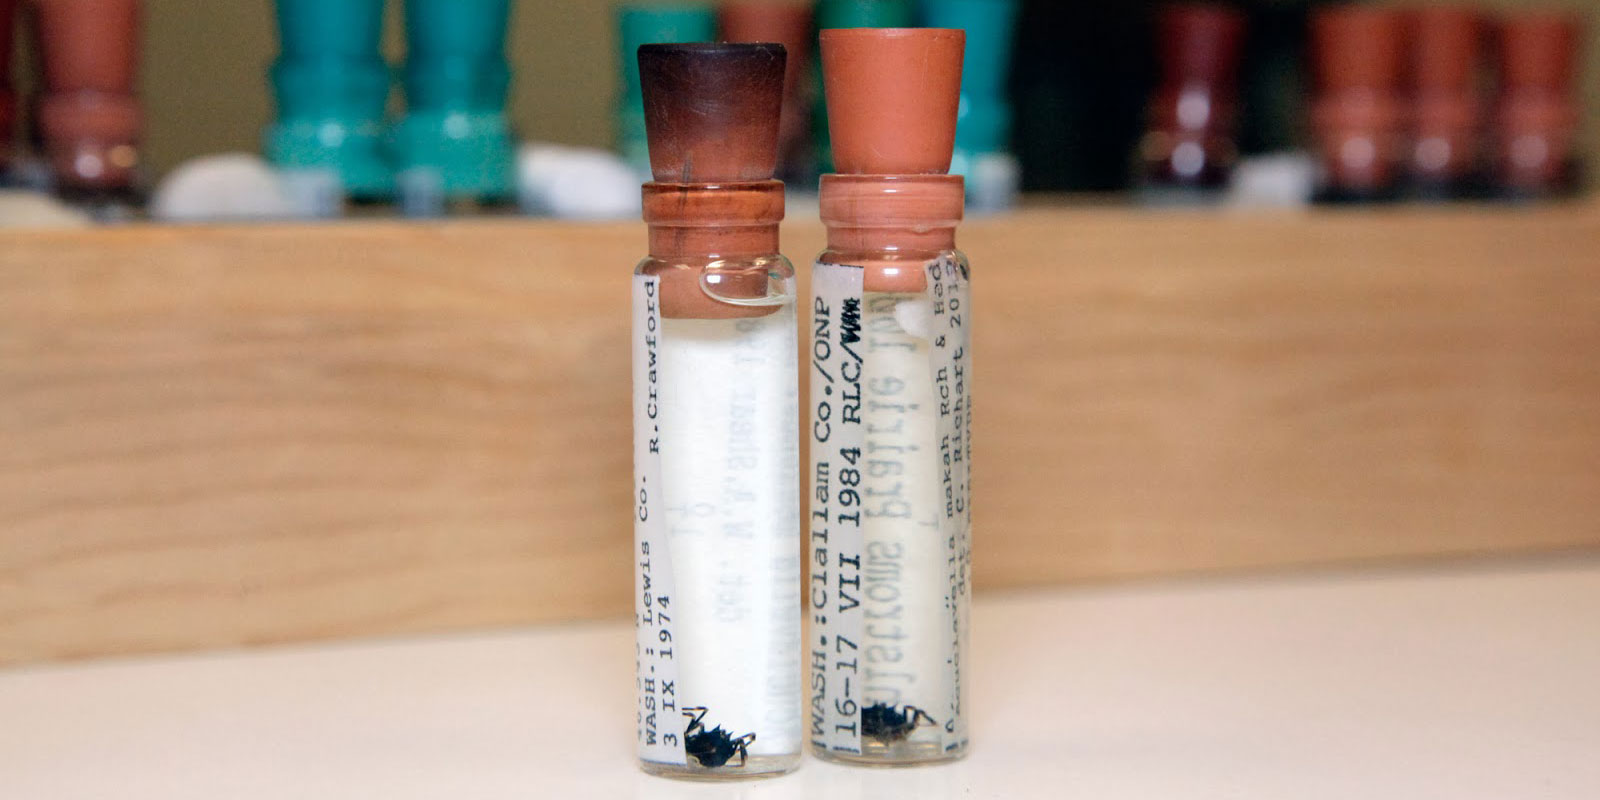 Two vials each containing one spider specimen sit on a table